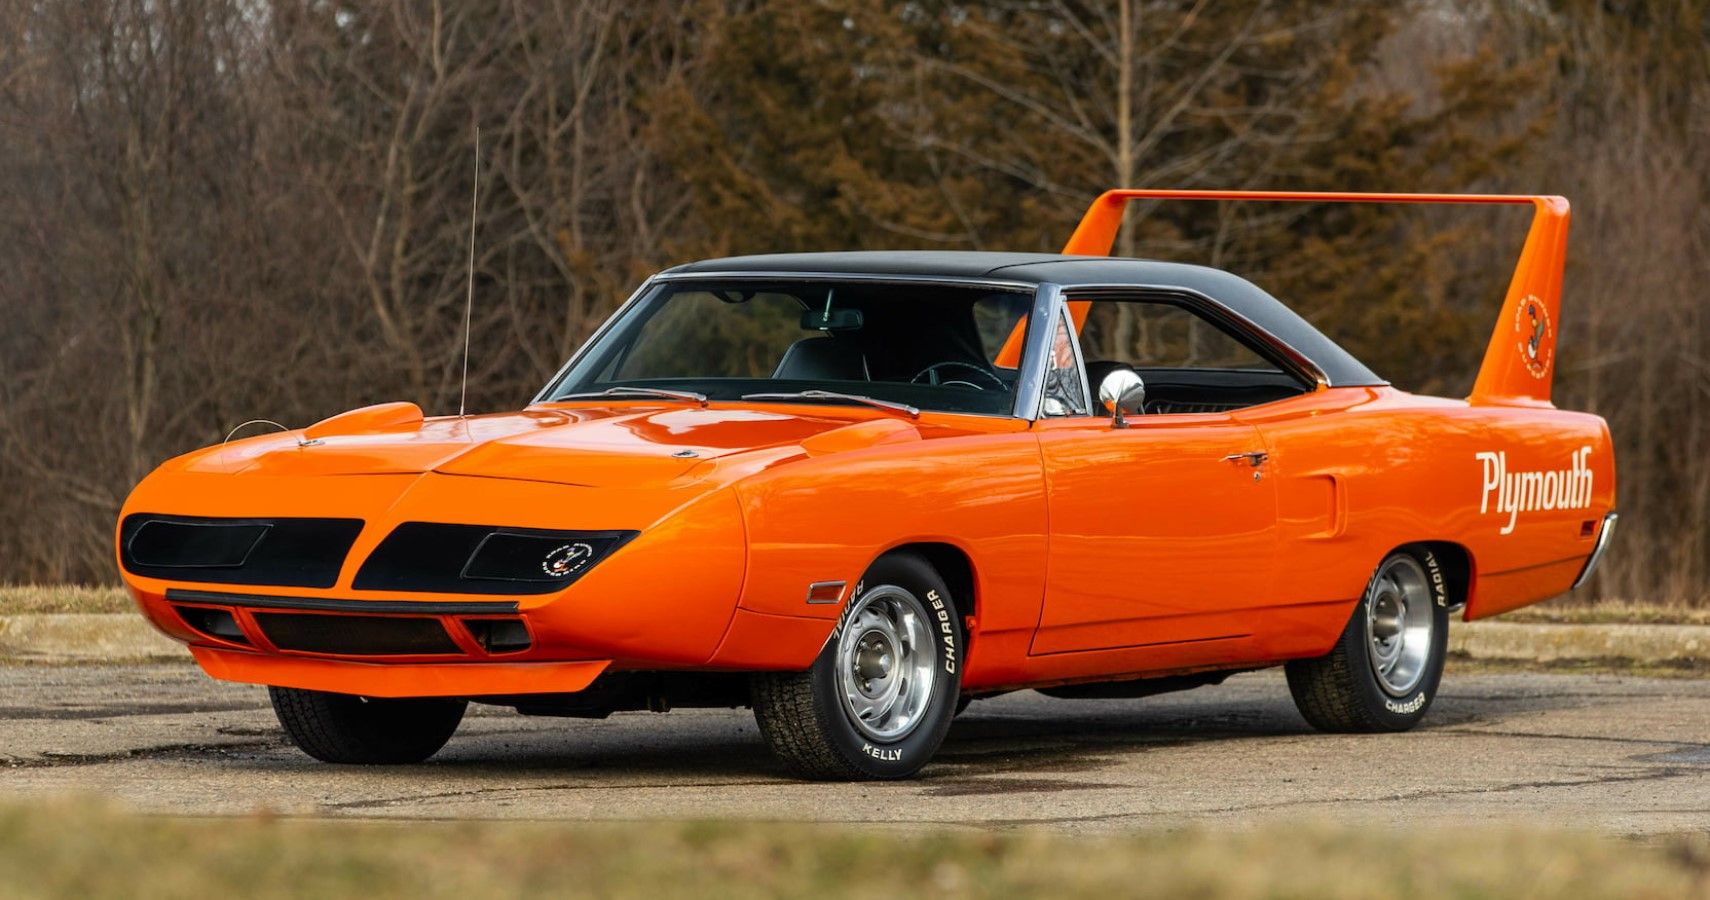 The Most Badass Plymouth Muscle Cars Of All Time, Ranked